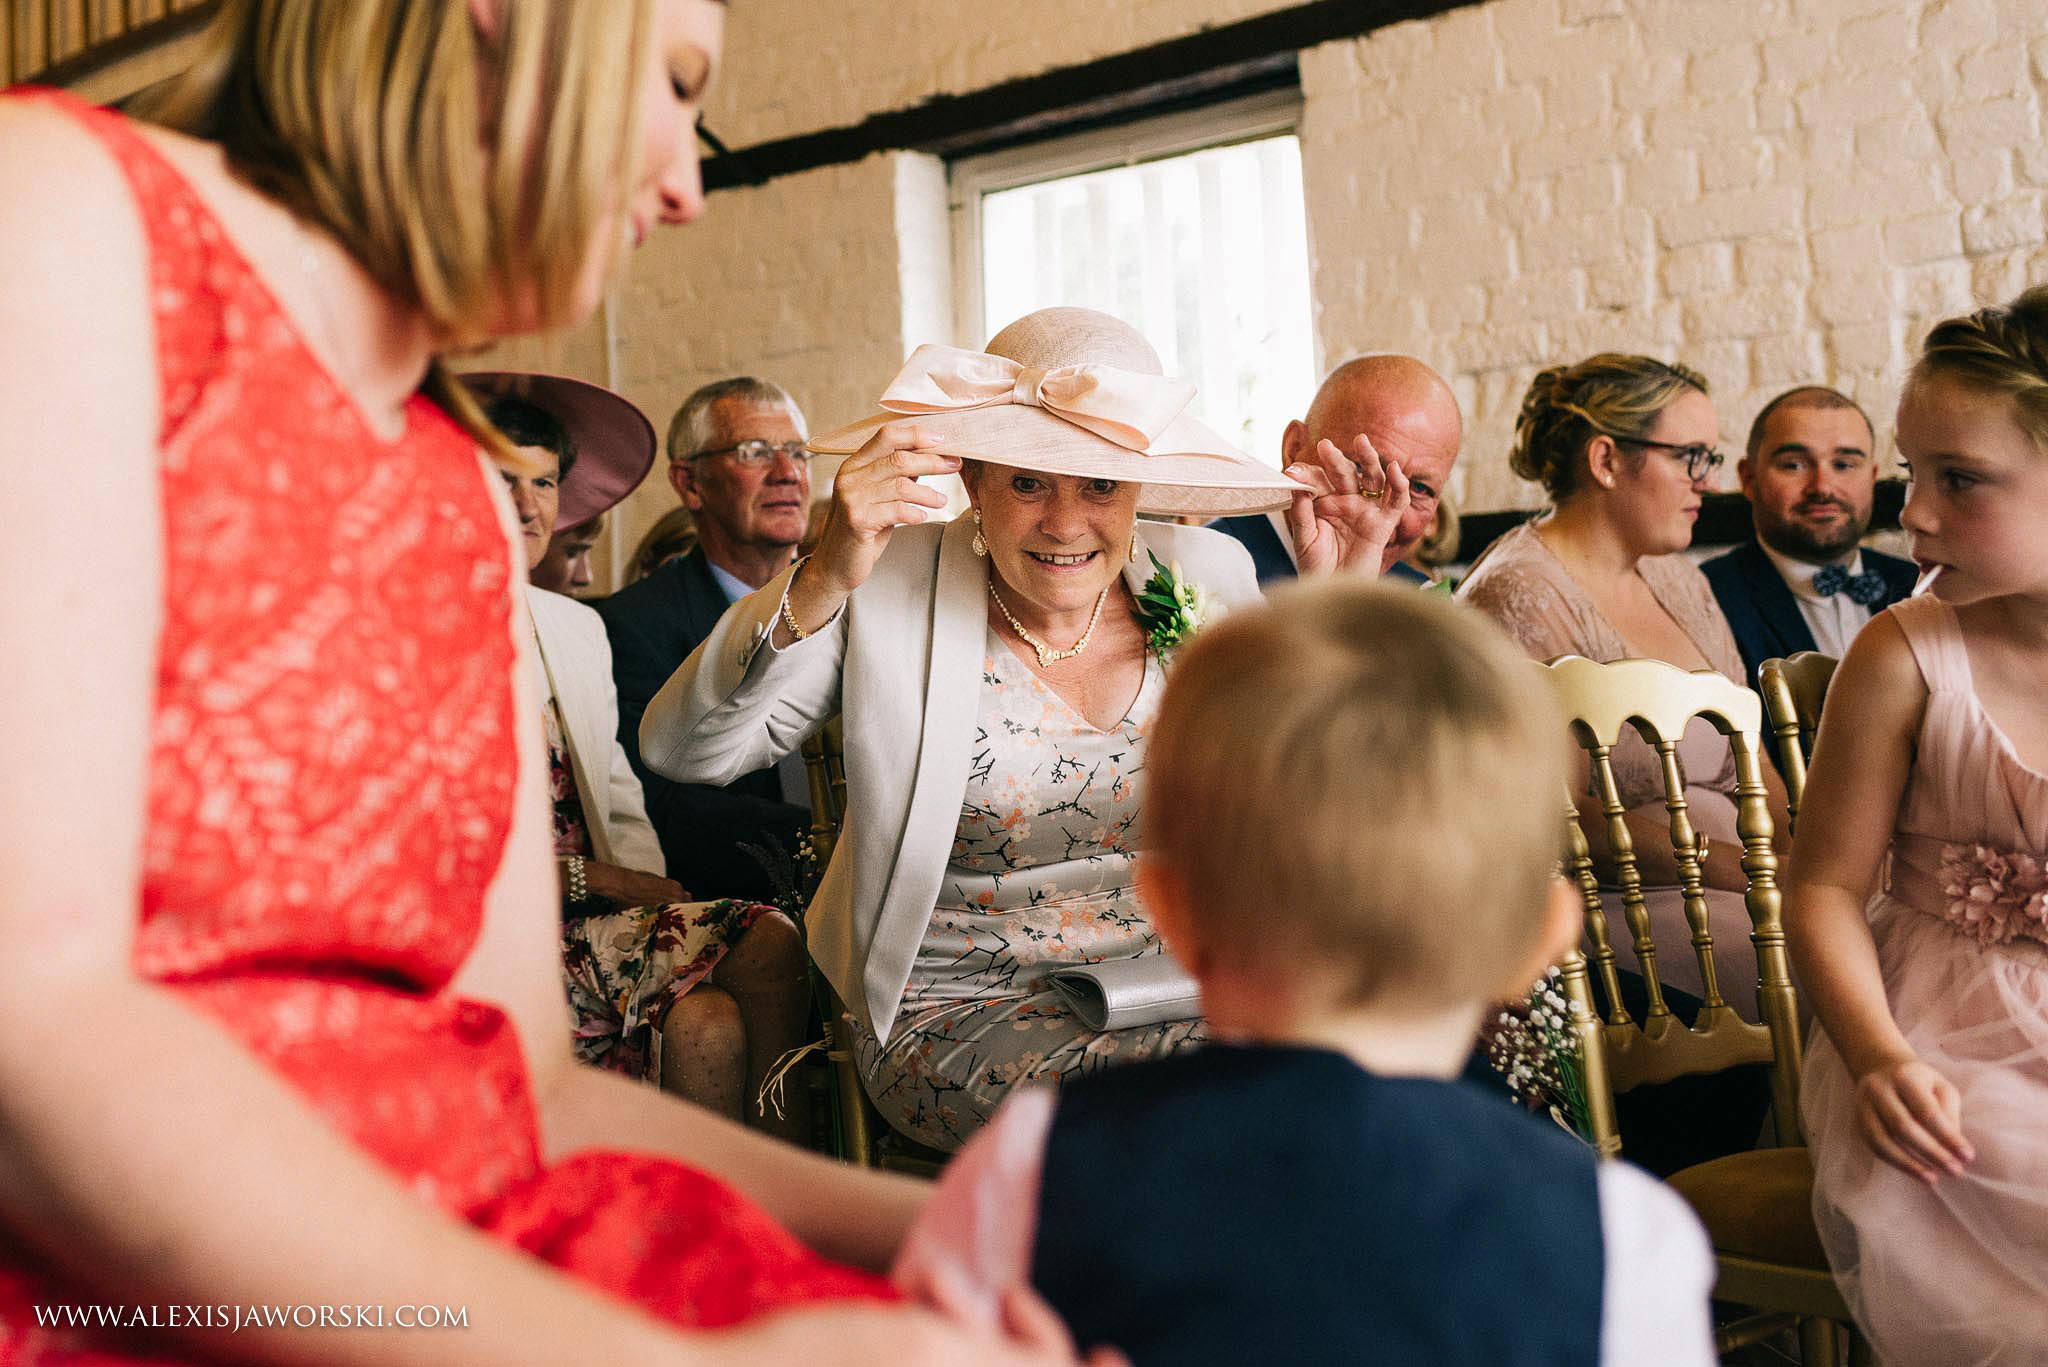 mum of the groom playing with grandchild